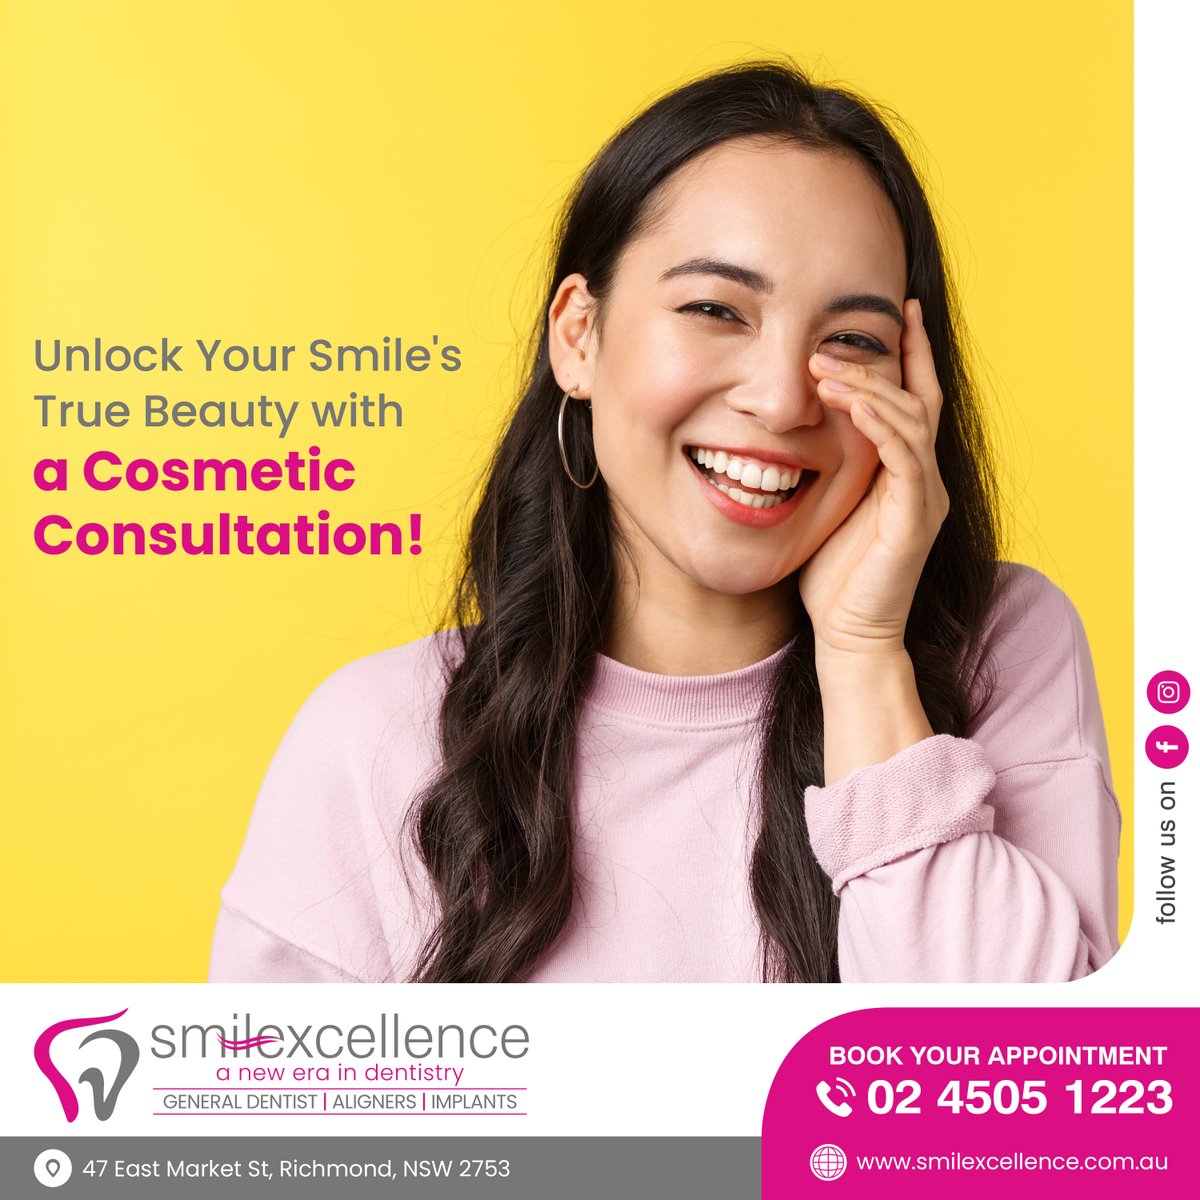 Discover the possibilities for your dream smile with a cosmetic consultation at Smilexcellence! Our expert team will tailor a treatment plan to enhance your natural beauty and boost your confidence. 

#smilexcellence #cosmeticdentistry #DreamSmile #CosmeticConsultation